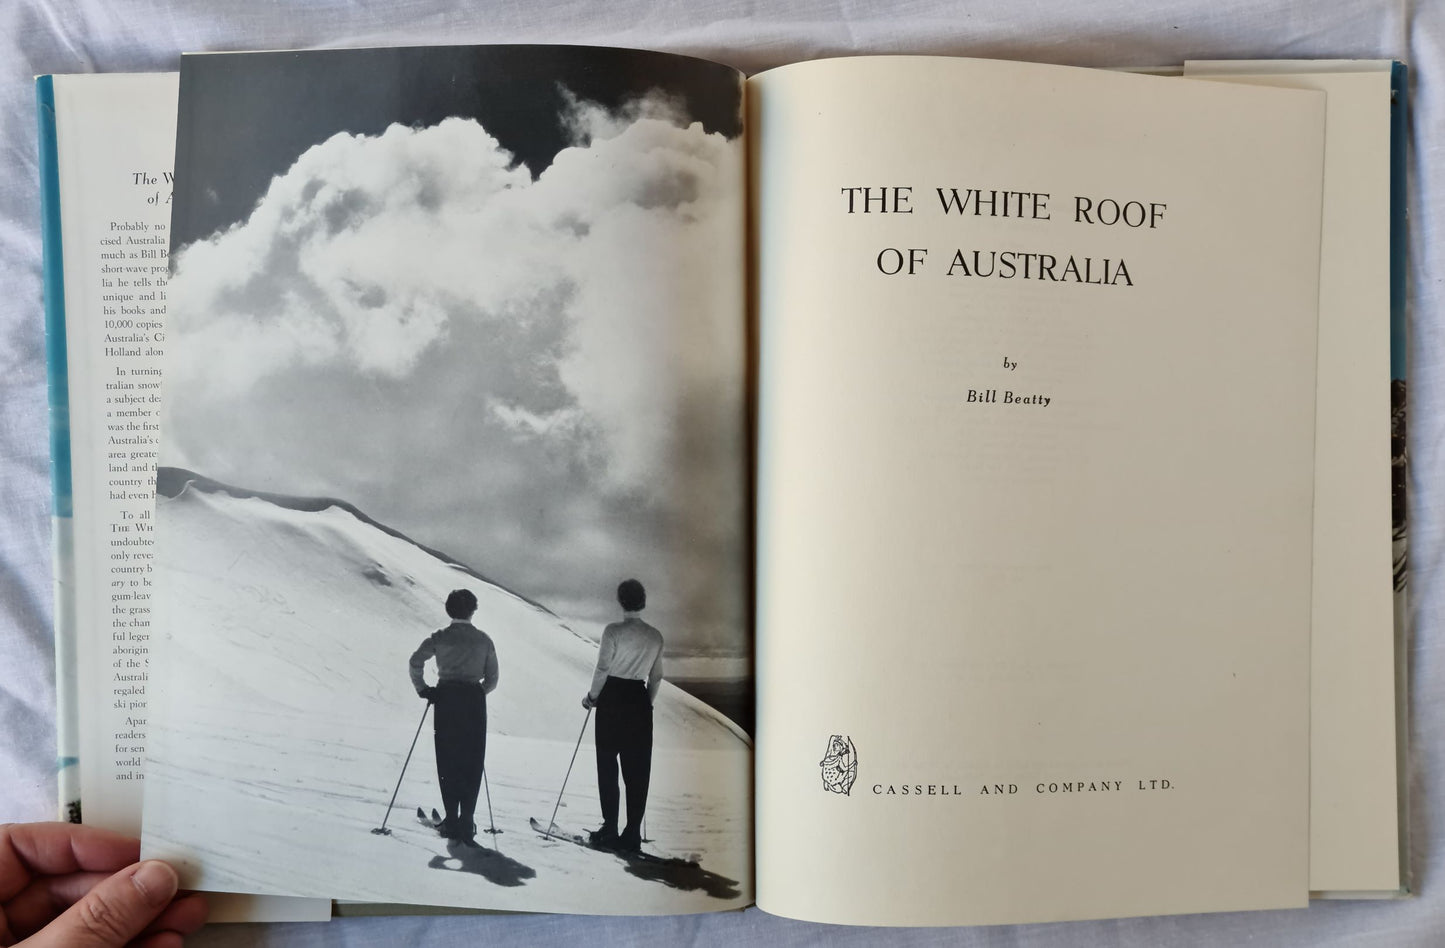 The White Roof of Australia by Bill Beatty